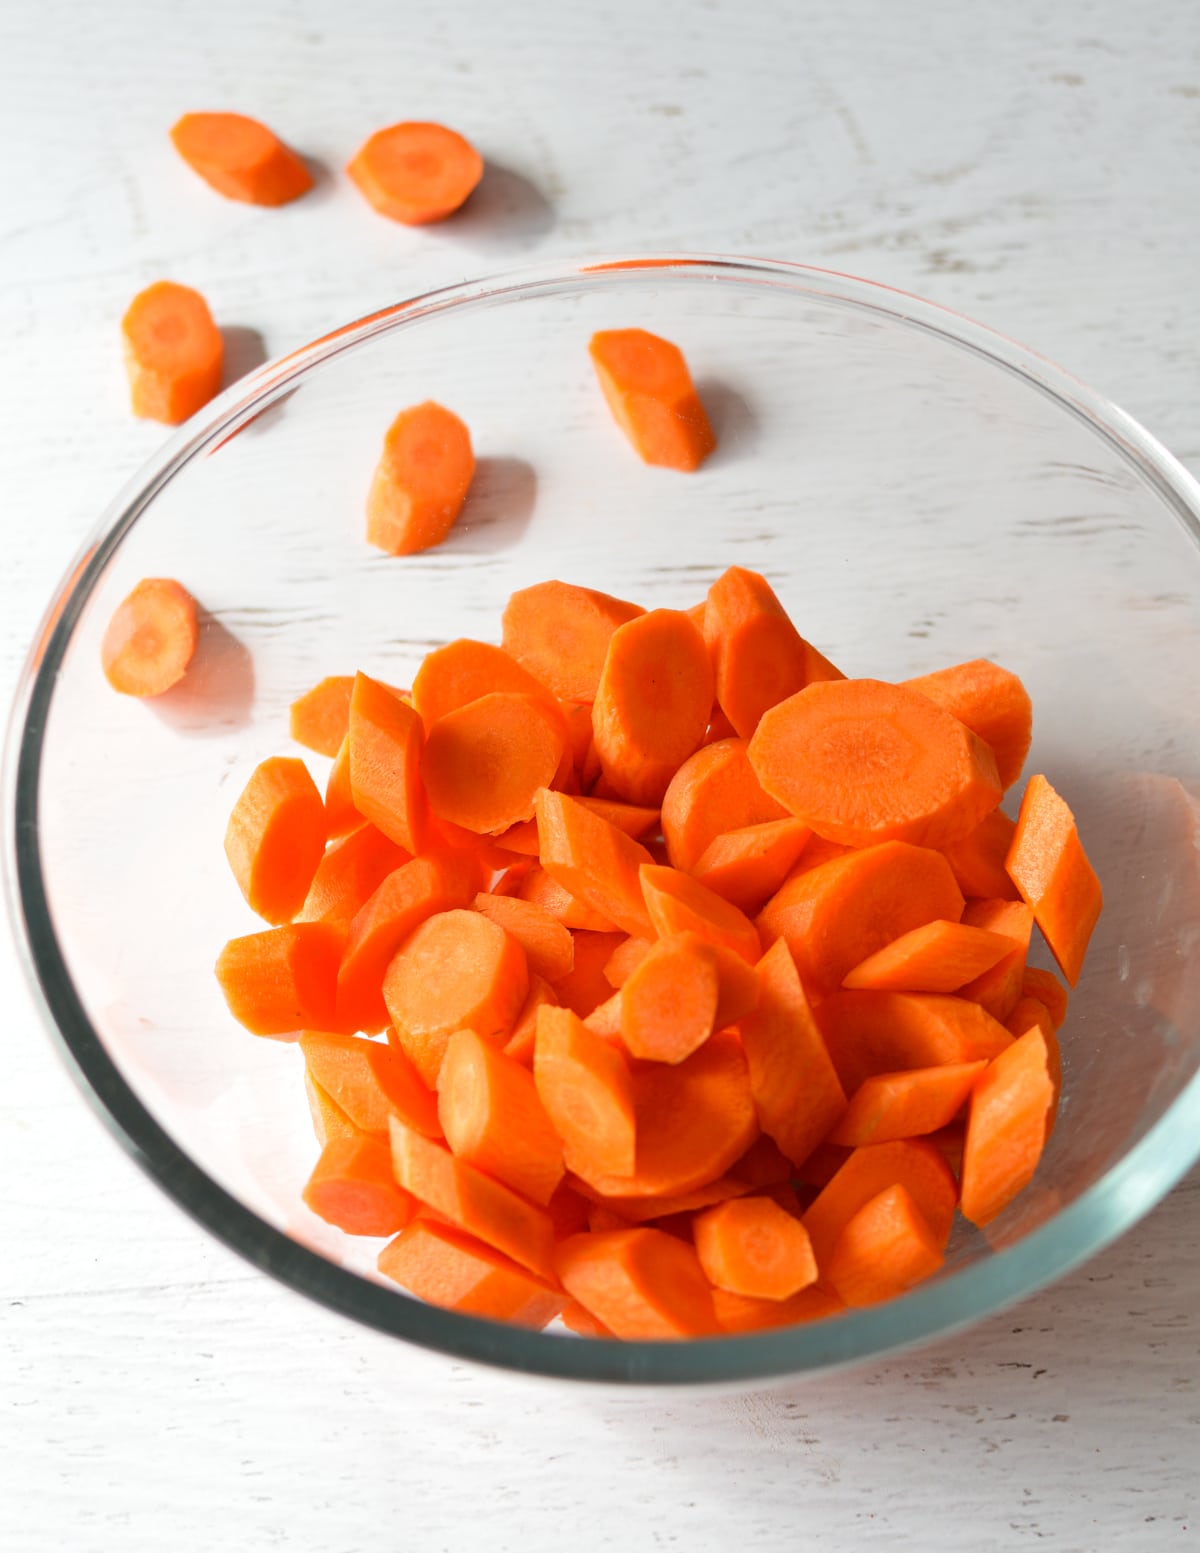 cut and peeled carrots in a bowl.